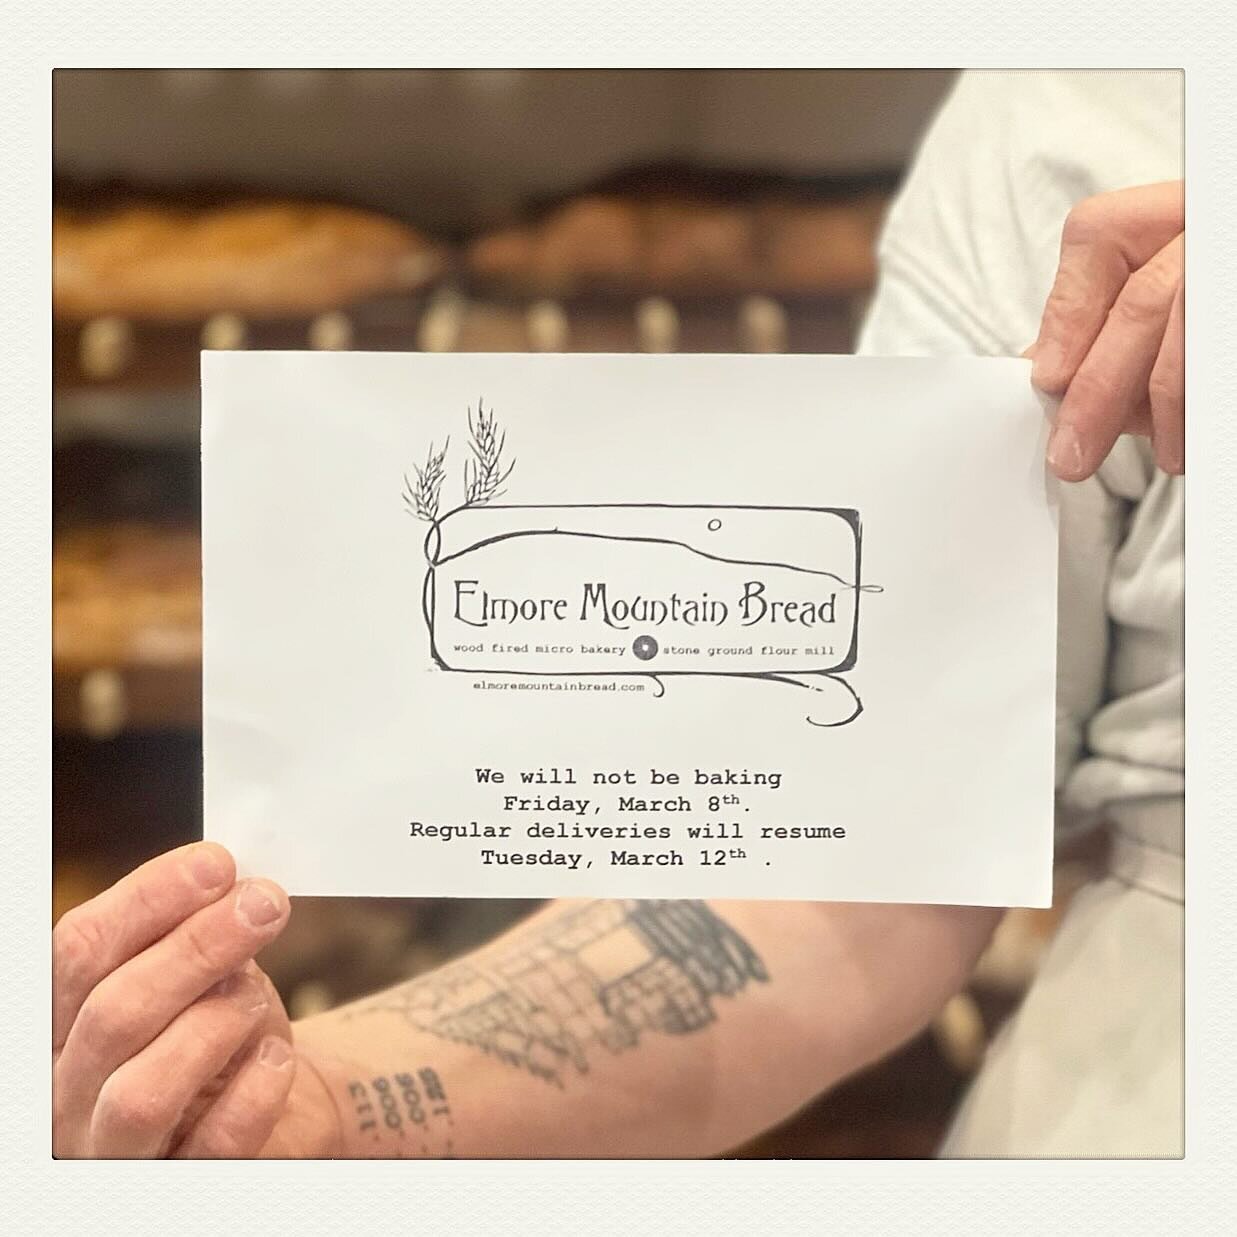 We are baking today, but will be closed this Friday.  I&rsquo;m headed down to Johnson and Wales University to teach at @breadbakersguild Camp Bread!  See you next Tuesday! #campbread #millyesterdaybaketoday #breadbakersguildofamerica